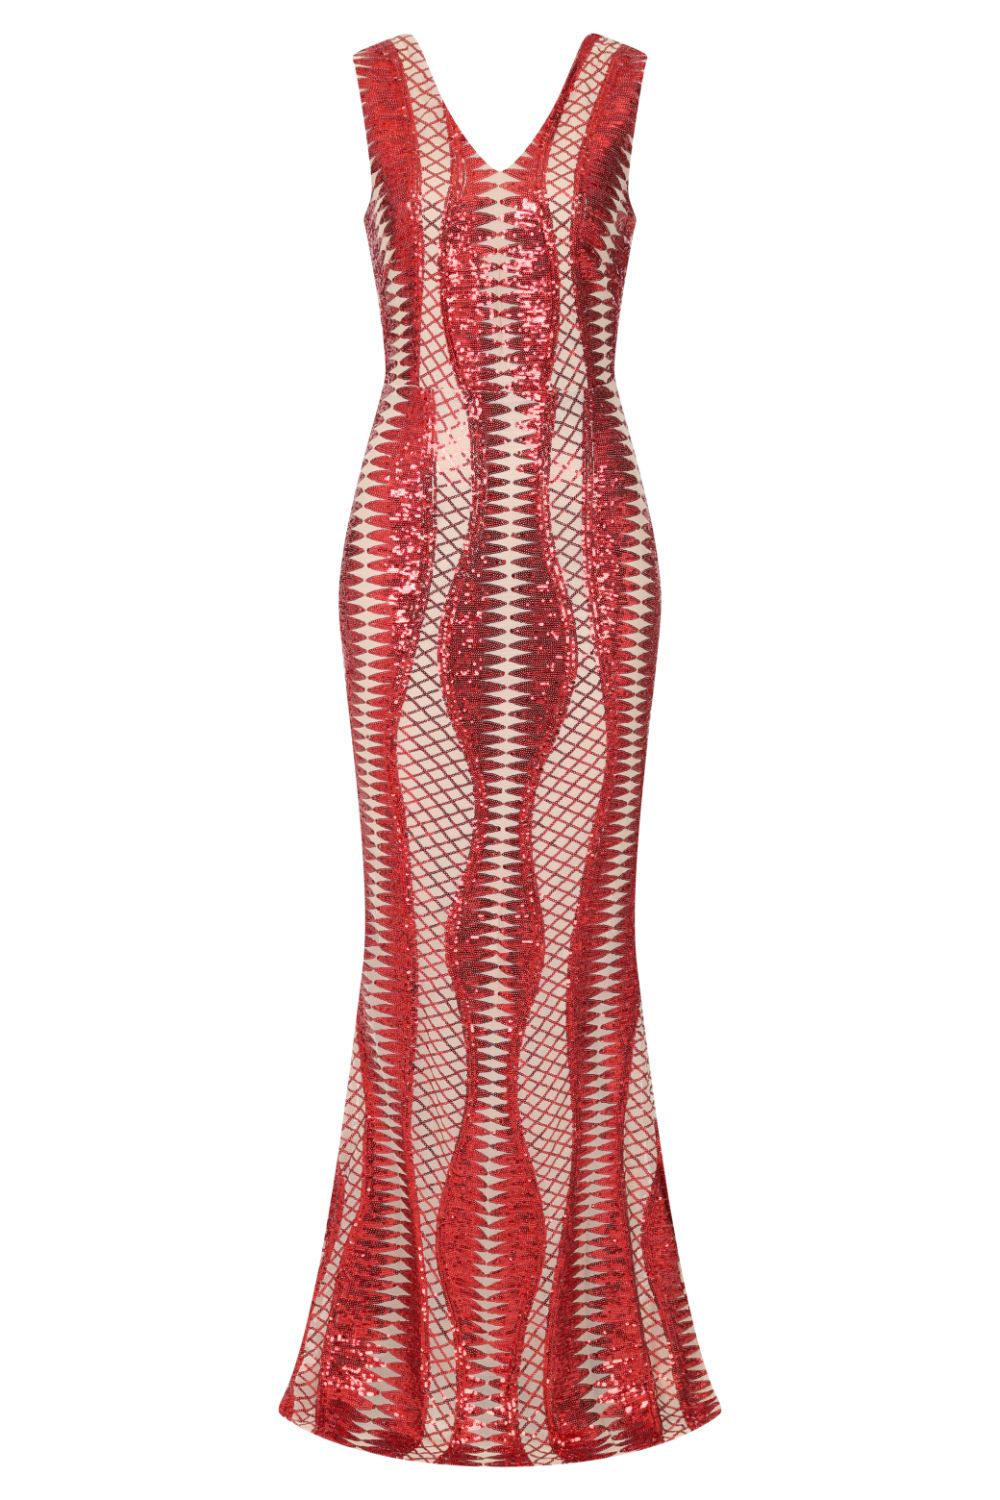 Twilight Red Nude Sequin Bandage Cage Bodycon Maxi Mermaid Dress